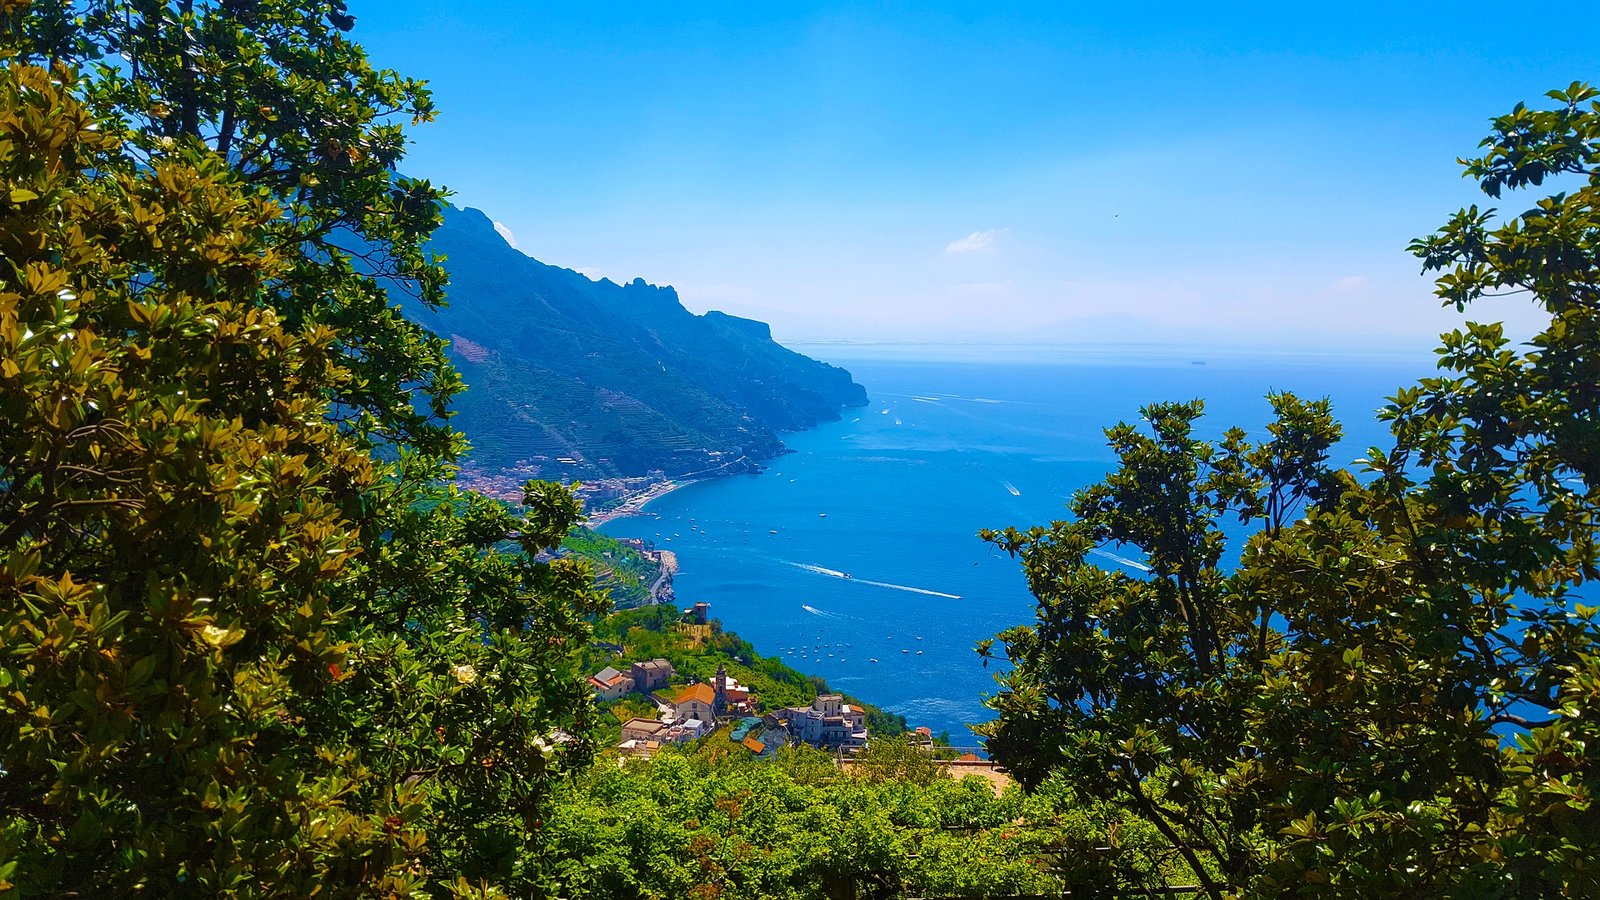 Why have private transfer from Naples to Positano?